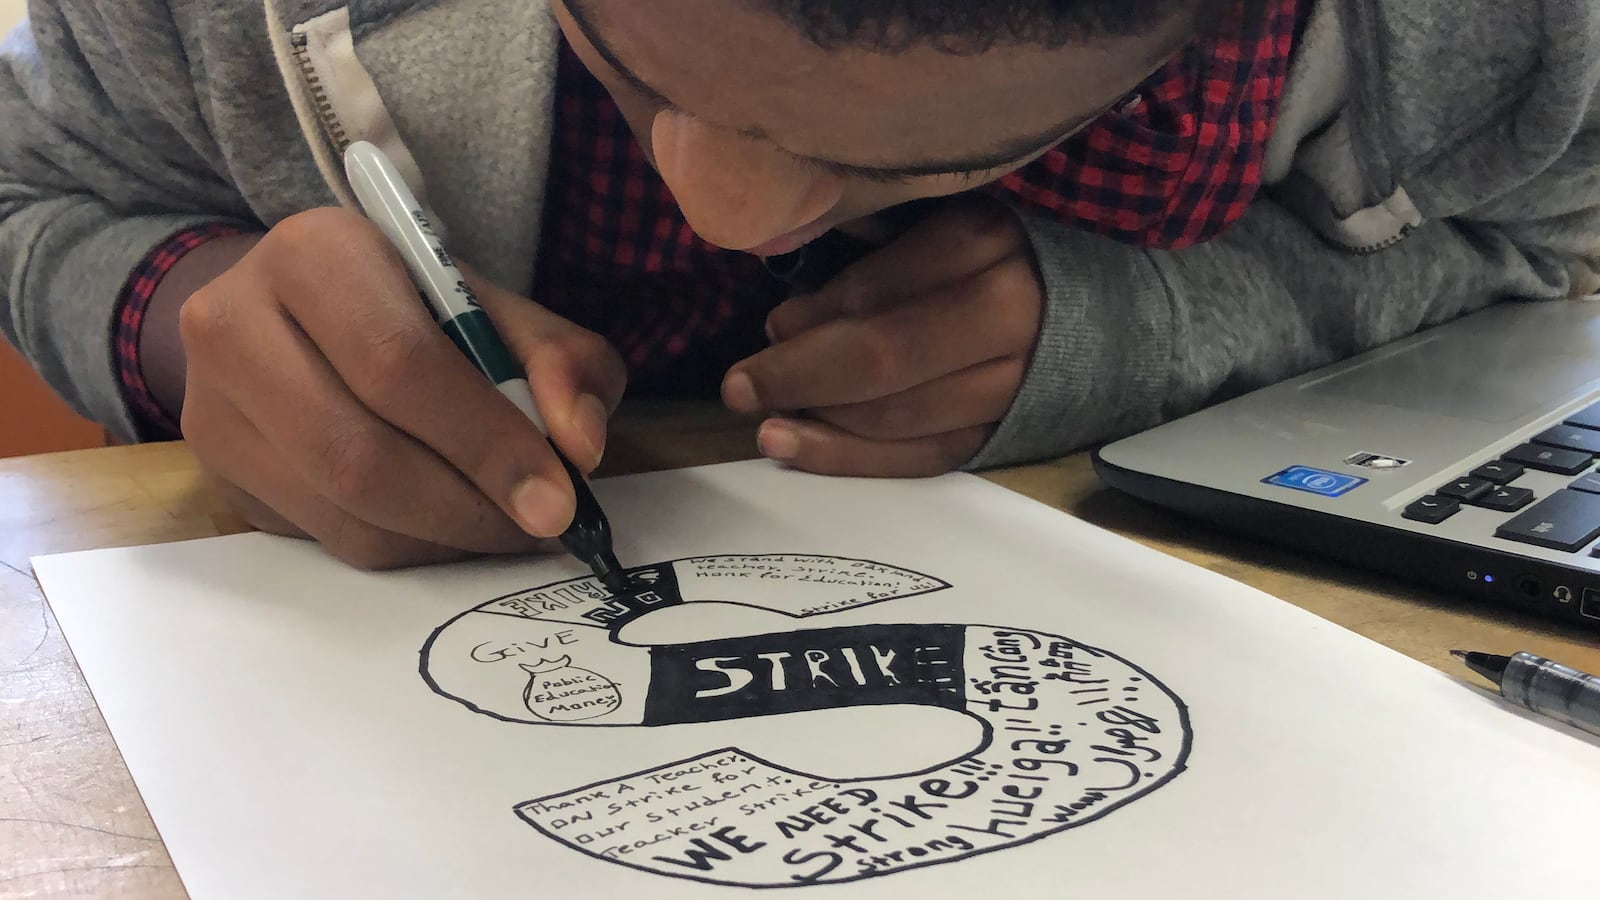 A student at Oakland International High School works on a strike-related art project, part of a lesson in the February 2019 run-up to a planned teachers strike in the Oakland Unified School District.